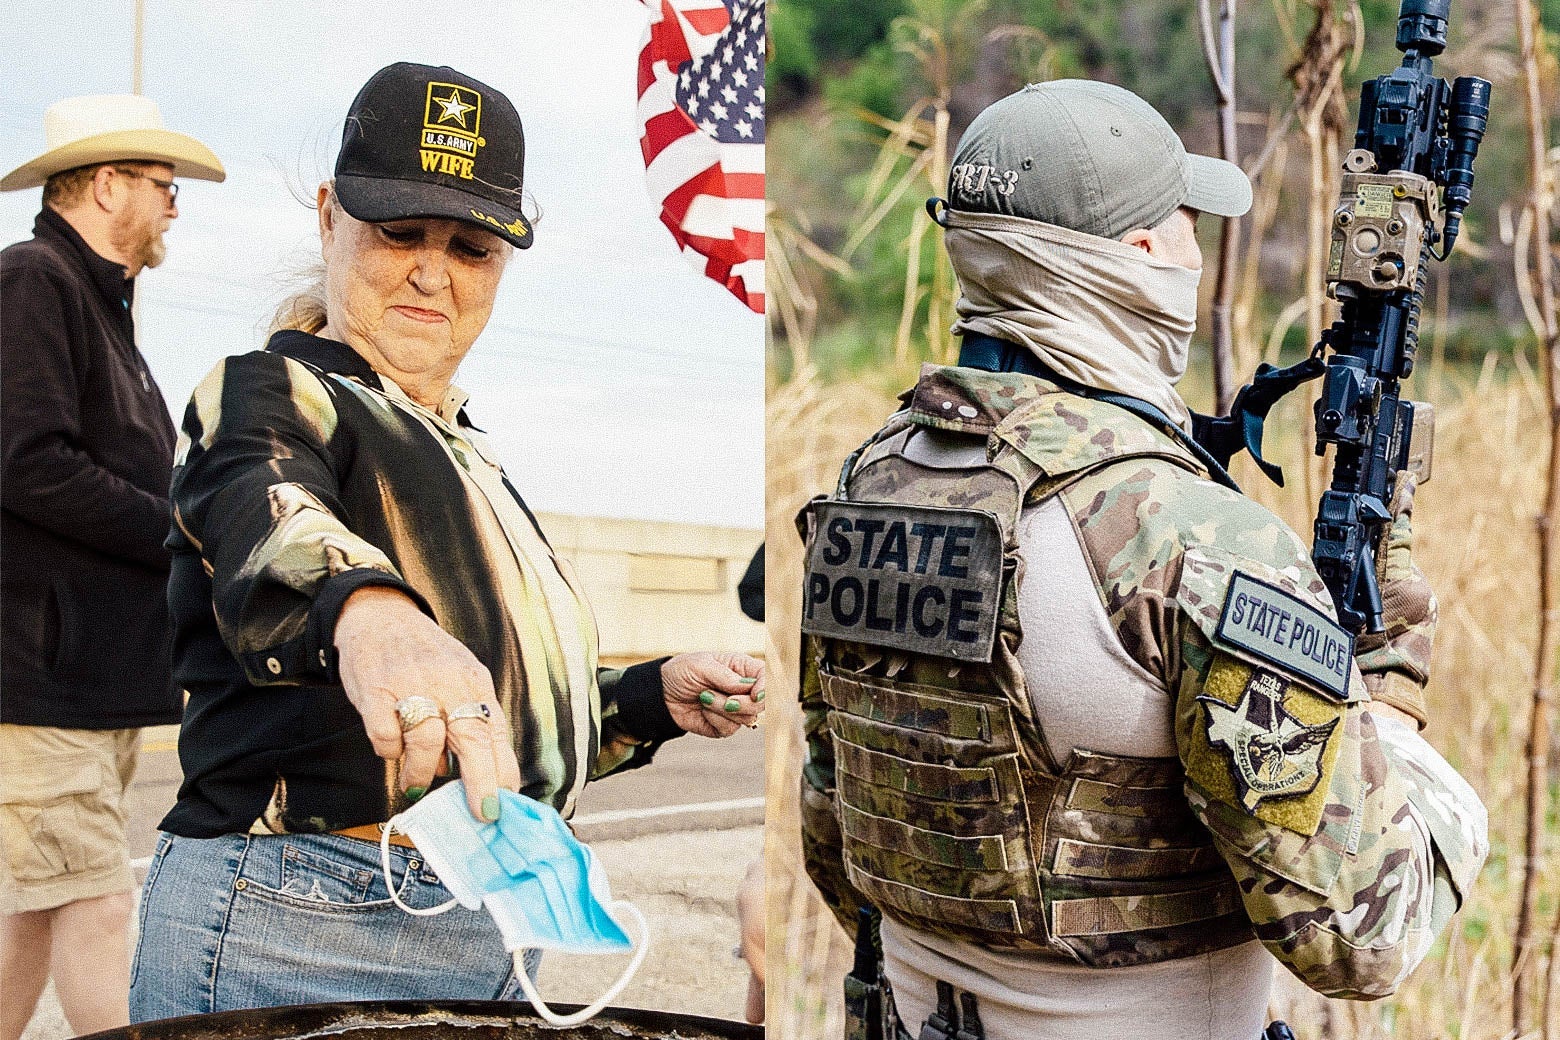 Left: Woman throwing away a mask. Right: State trooper with a gun
